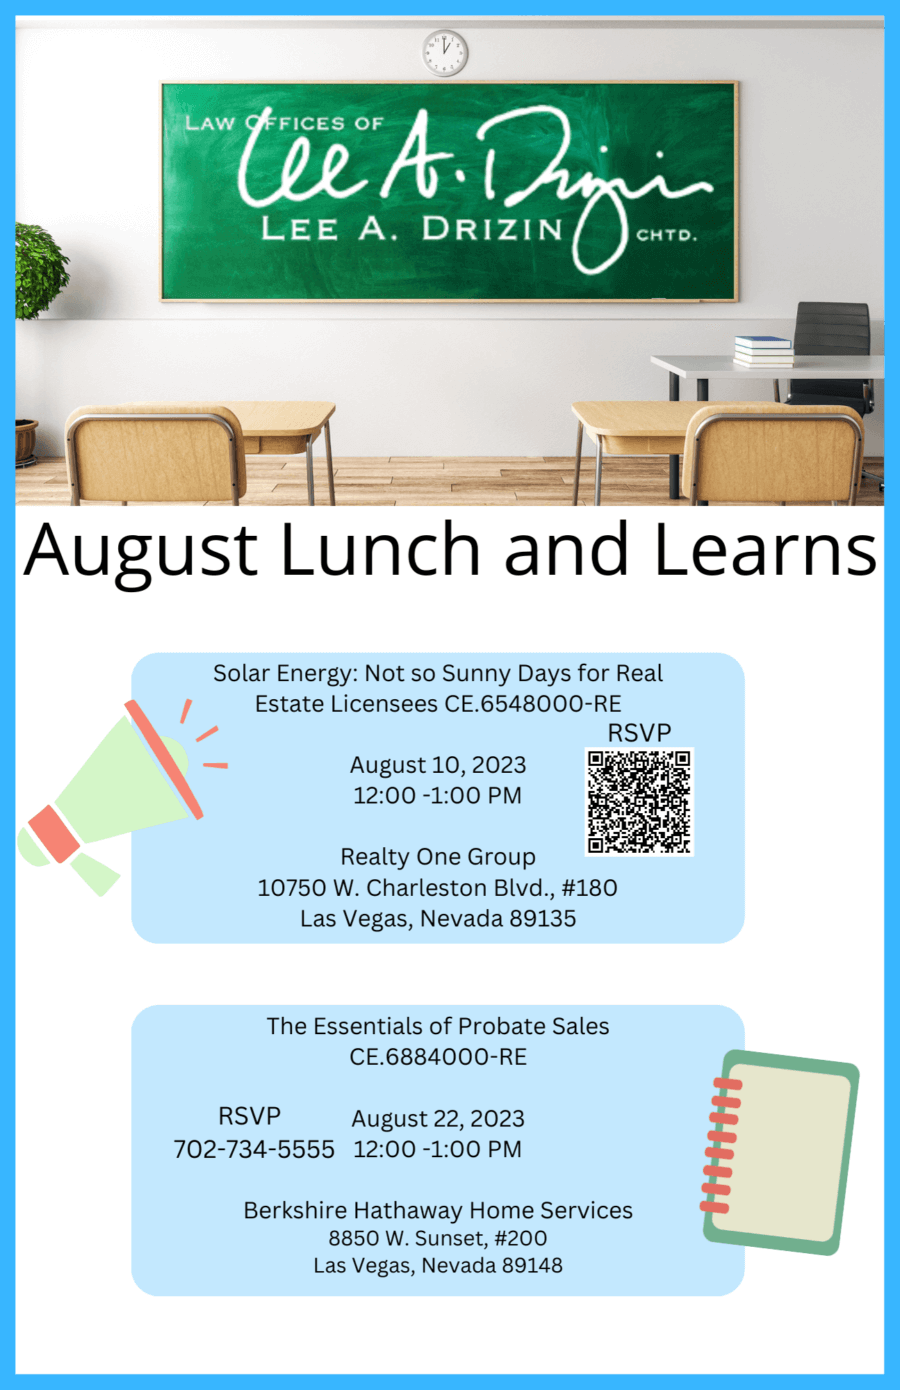 August Lunch and Learn August 10, 2023